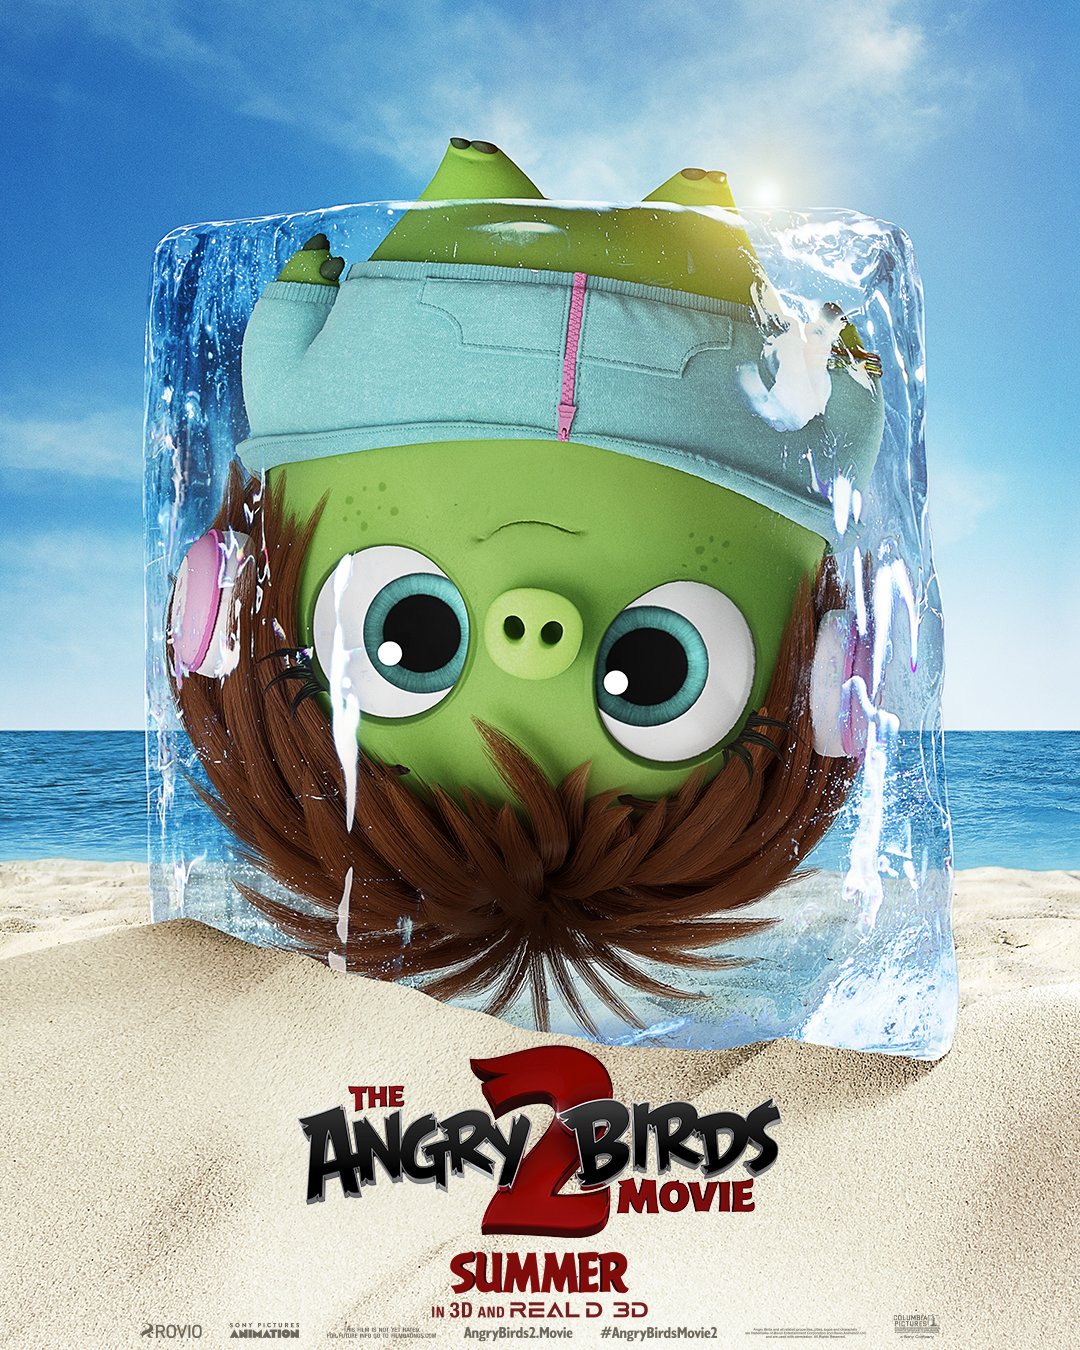 Twitter \ Sony Picture's more than just angry birds in this flock. Courtney, Garry, and Silver join the team in The #AngryBirdsMovie in theaters this summer!